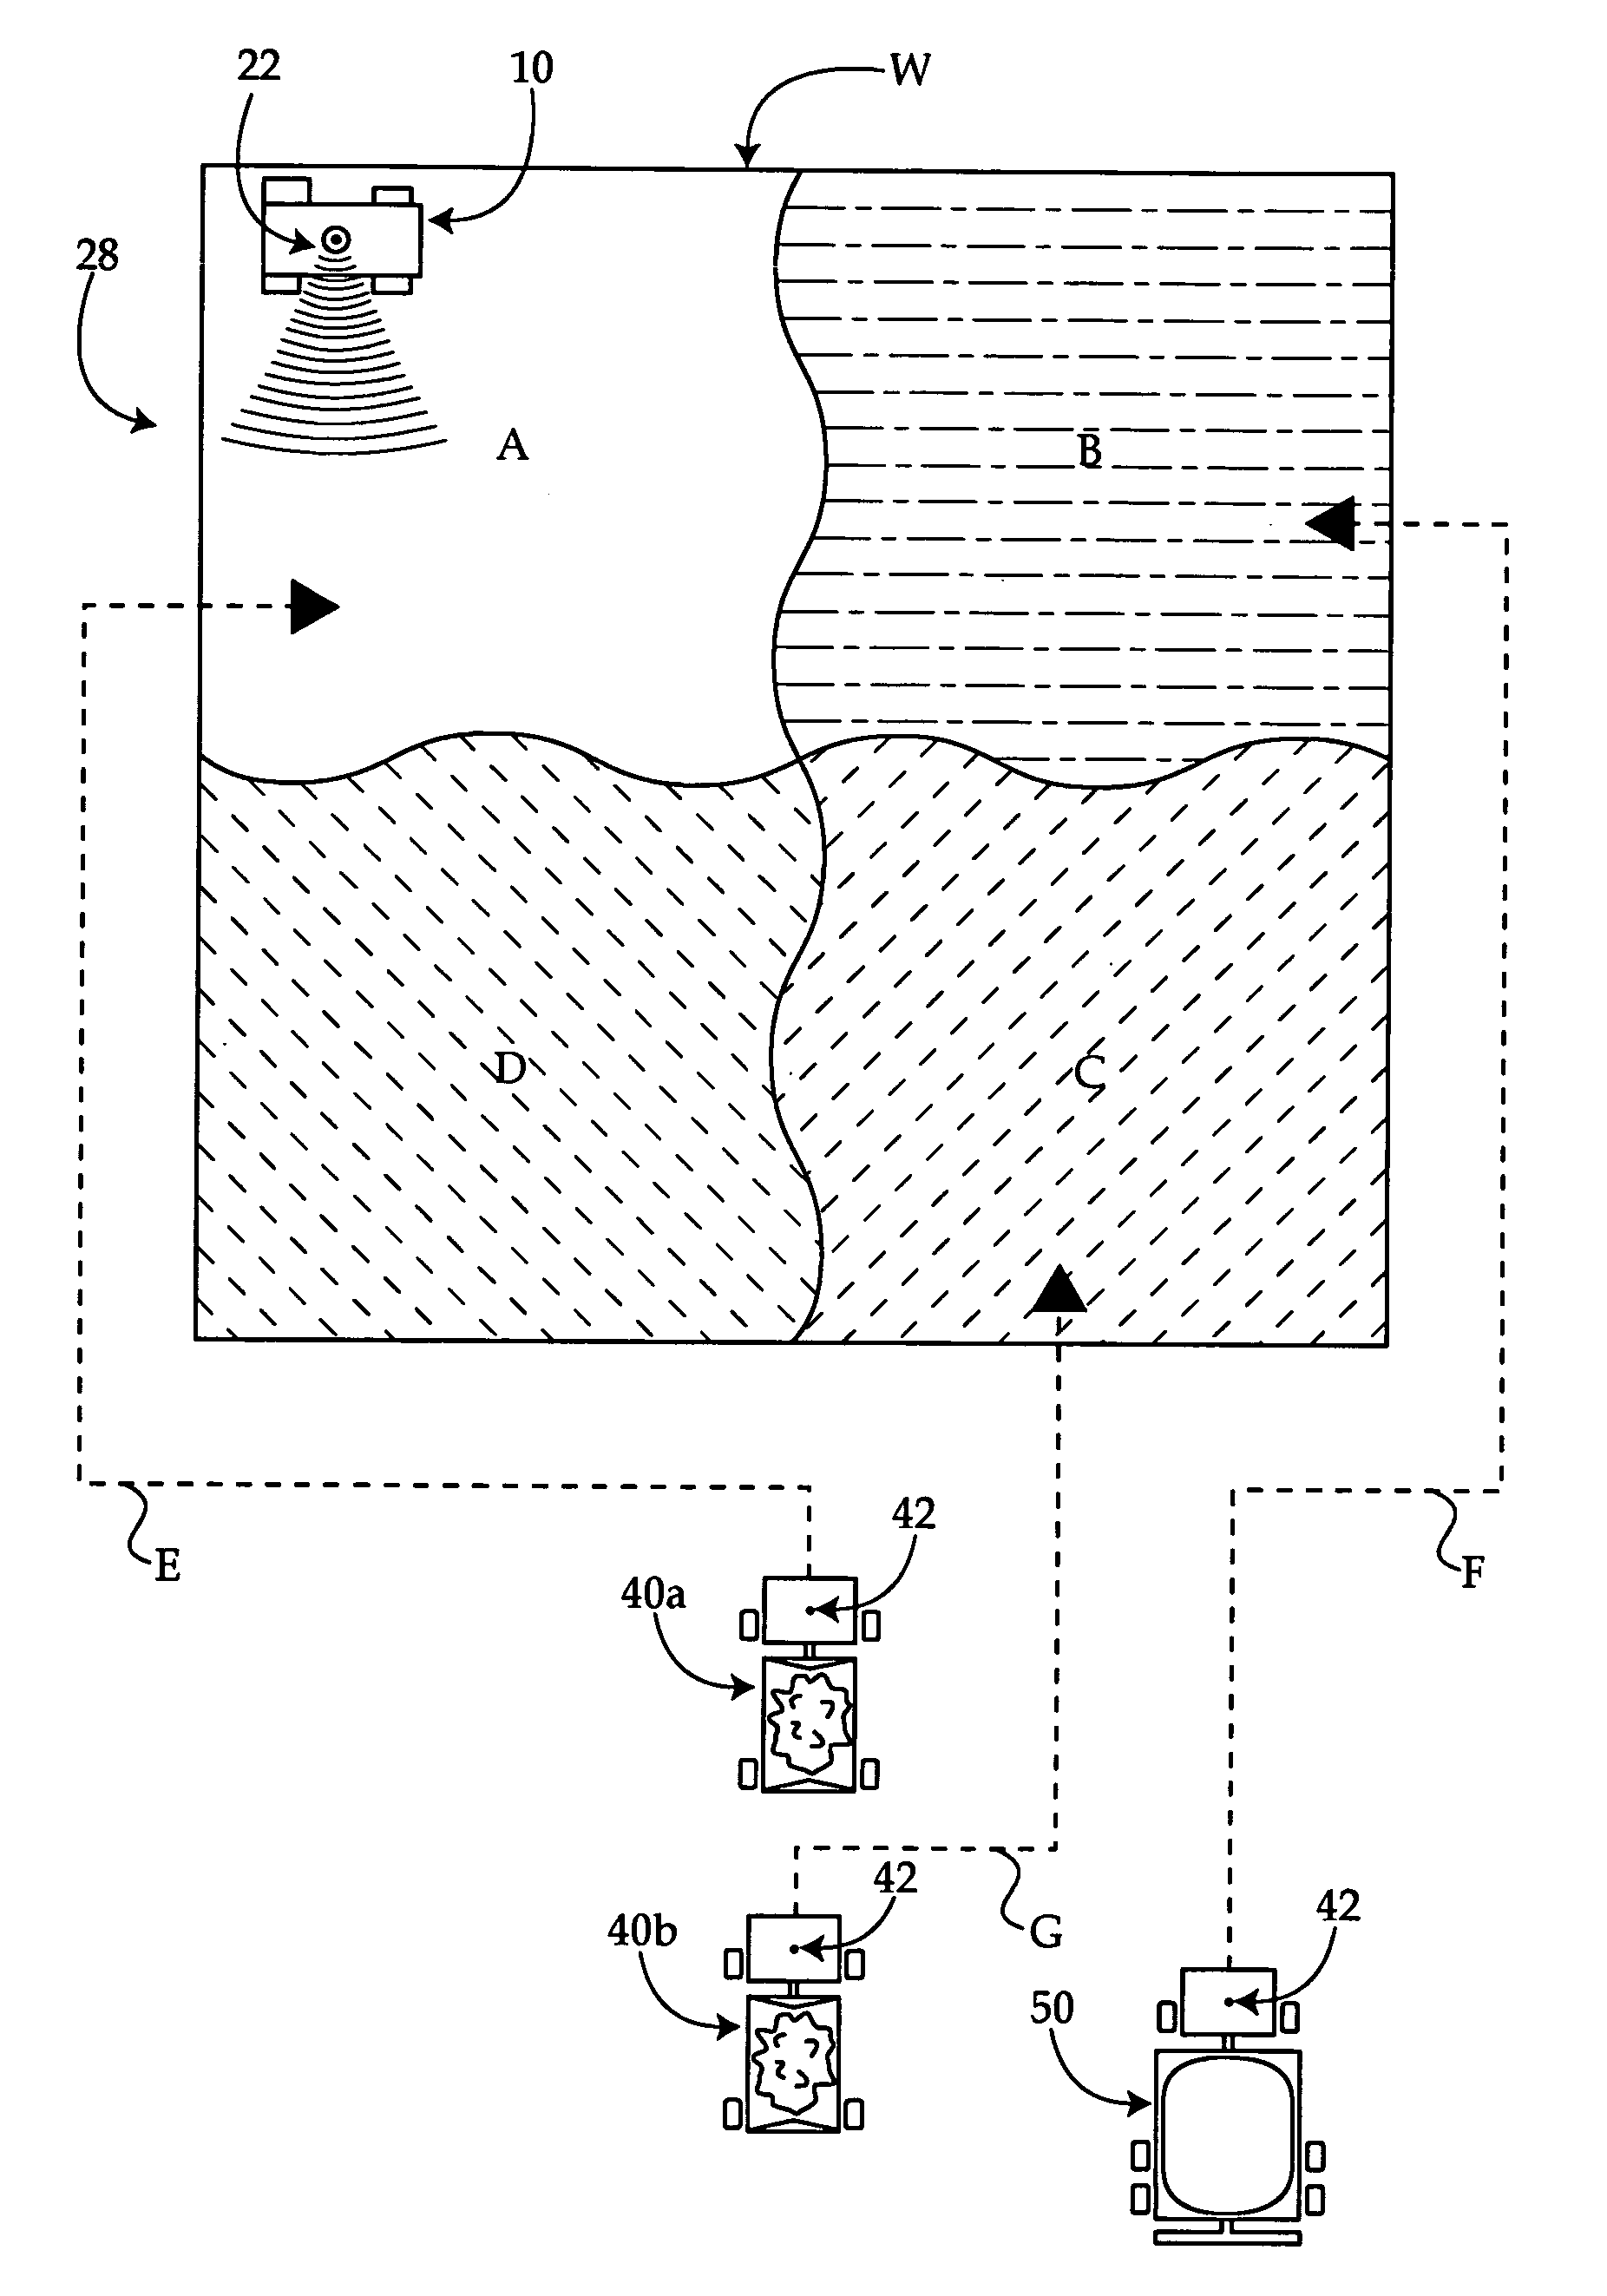 Worksite preparation method using compaction response and mapping information